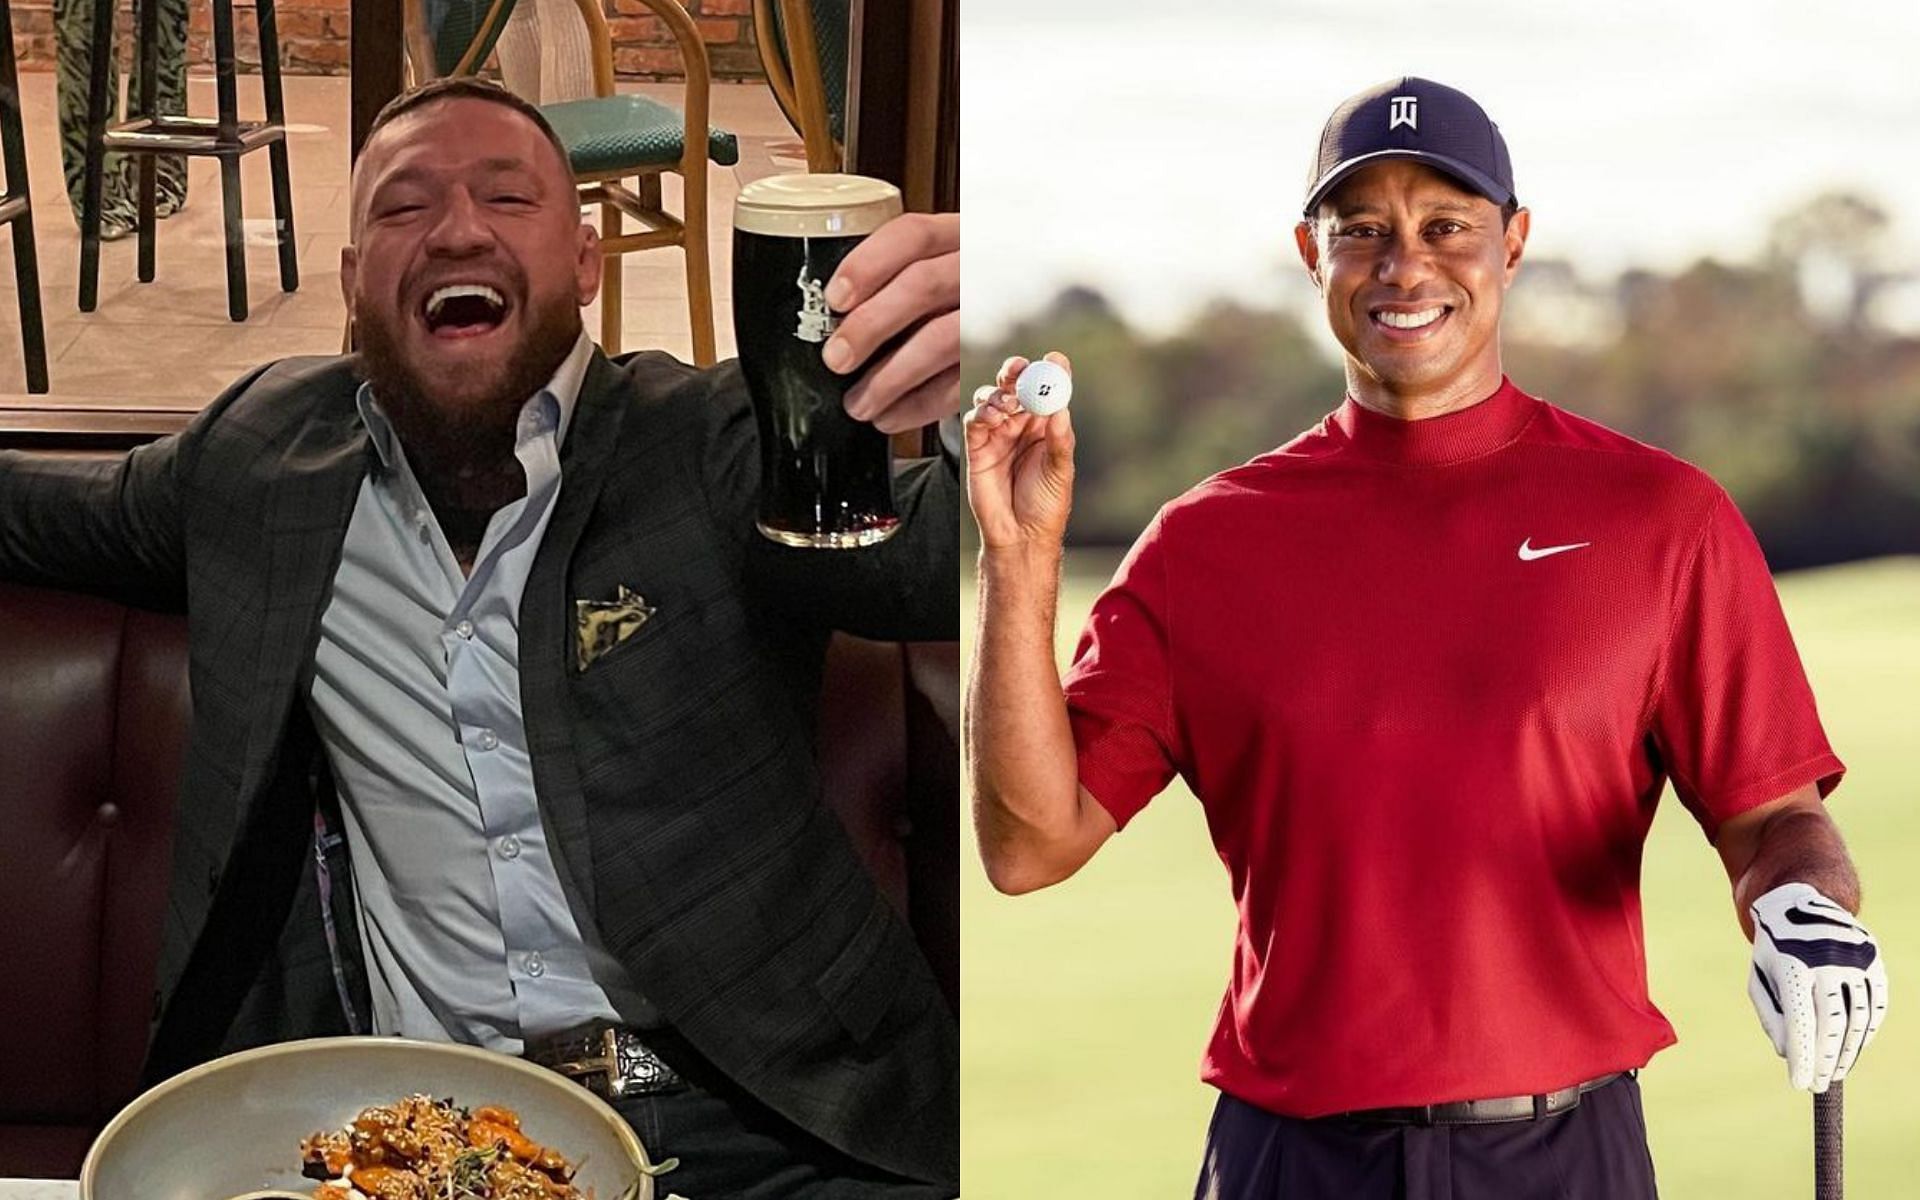 When Conor McGregor took a jab at Tiger Woods following the golfer’s DUI arrest